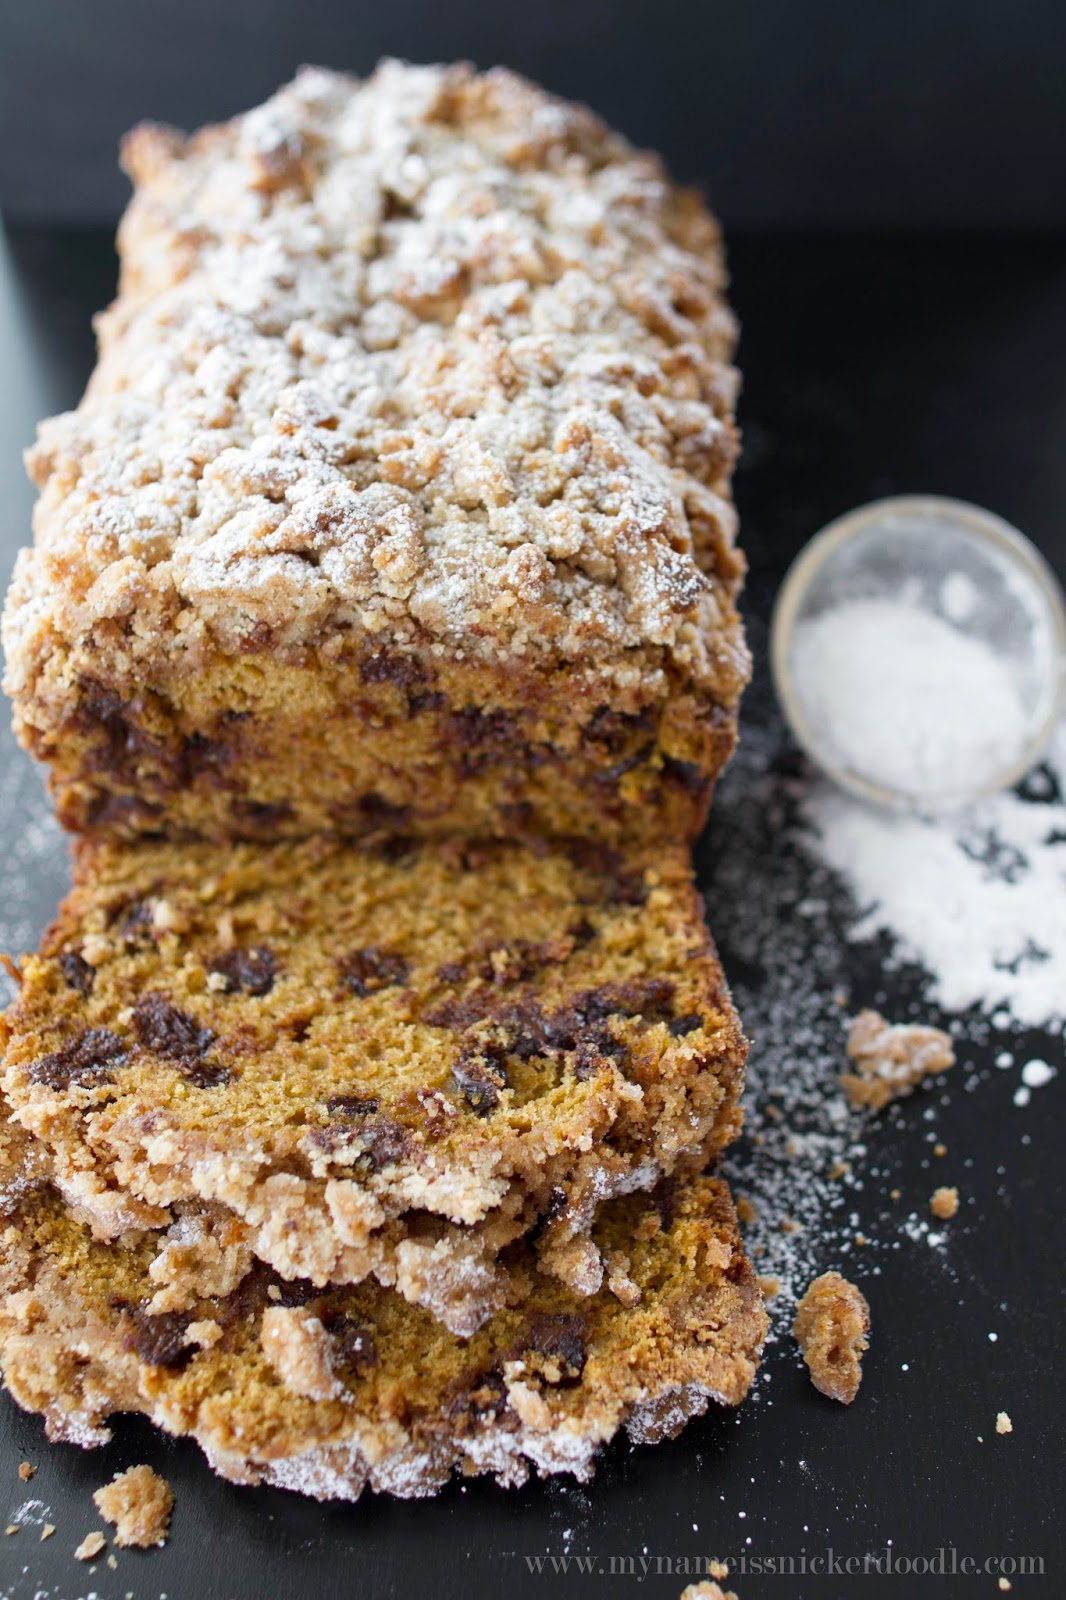 Yummy Pumpkin Chocolate Chip Bread with a Streusel Topping! | My Name Is Snickerdoodle